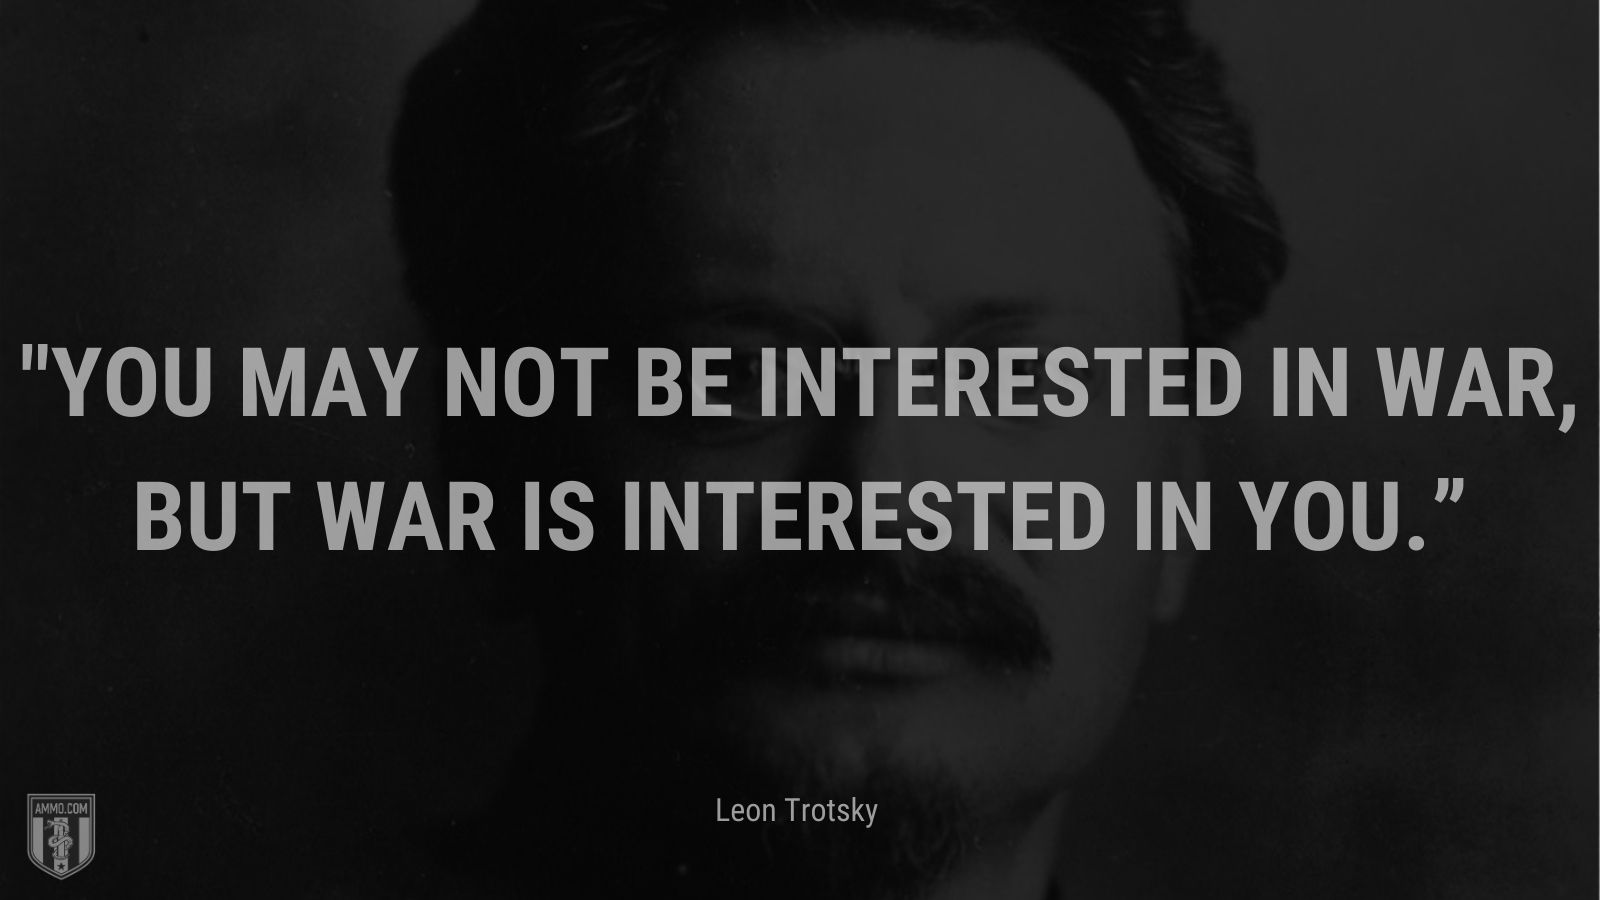 “You may not be interested in war, but war is interested in you.” - Leon Trotsky